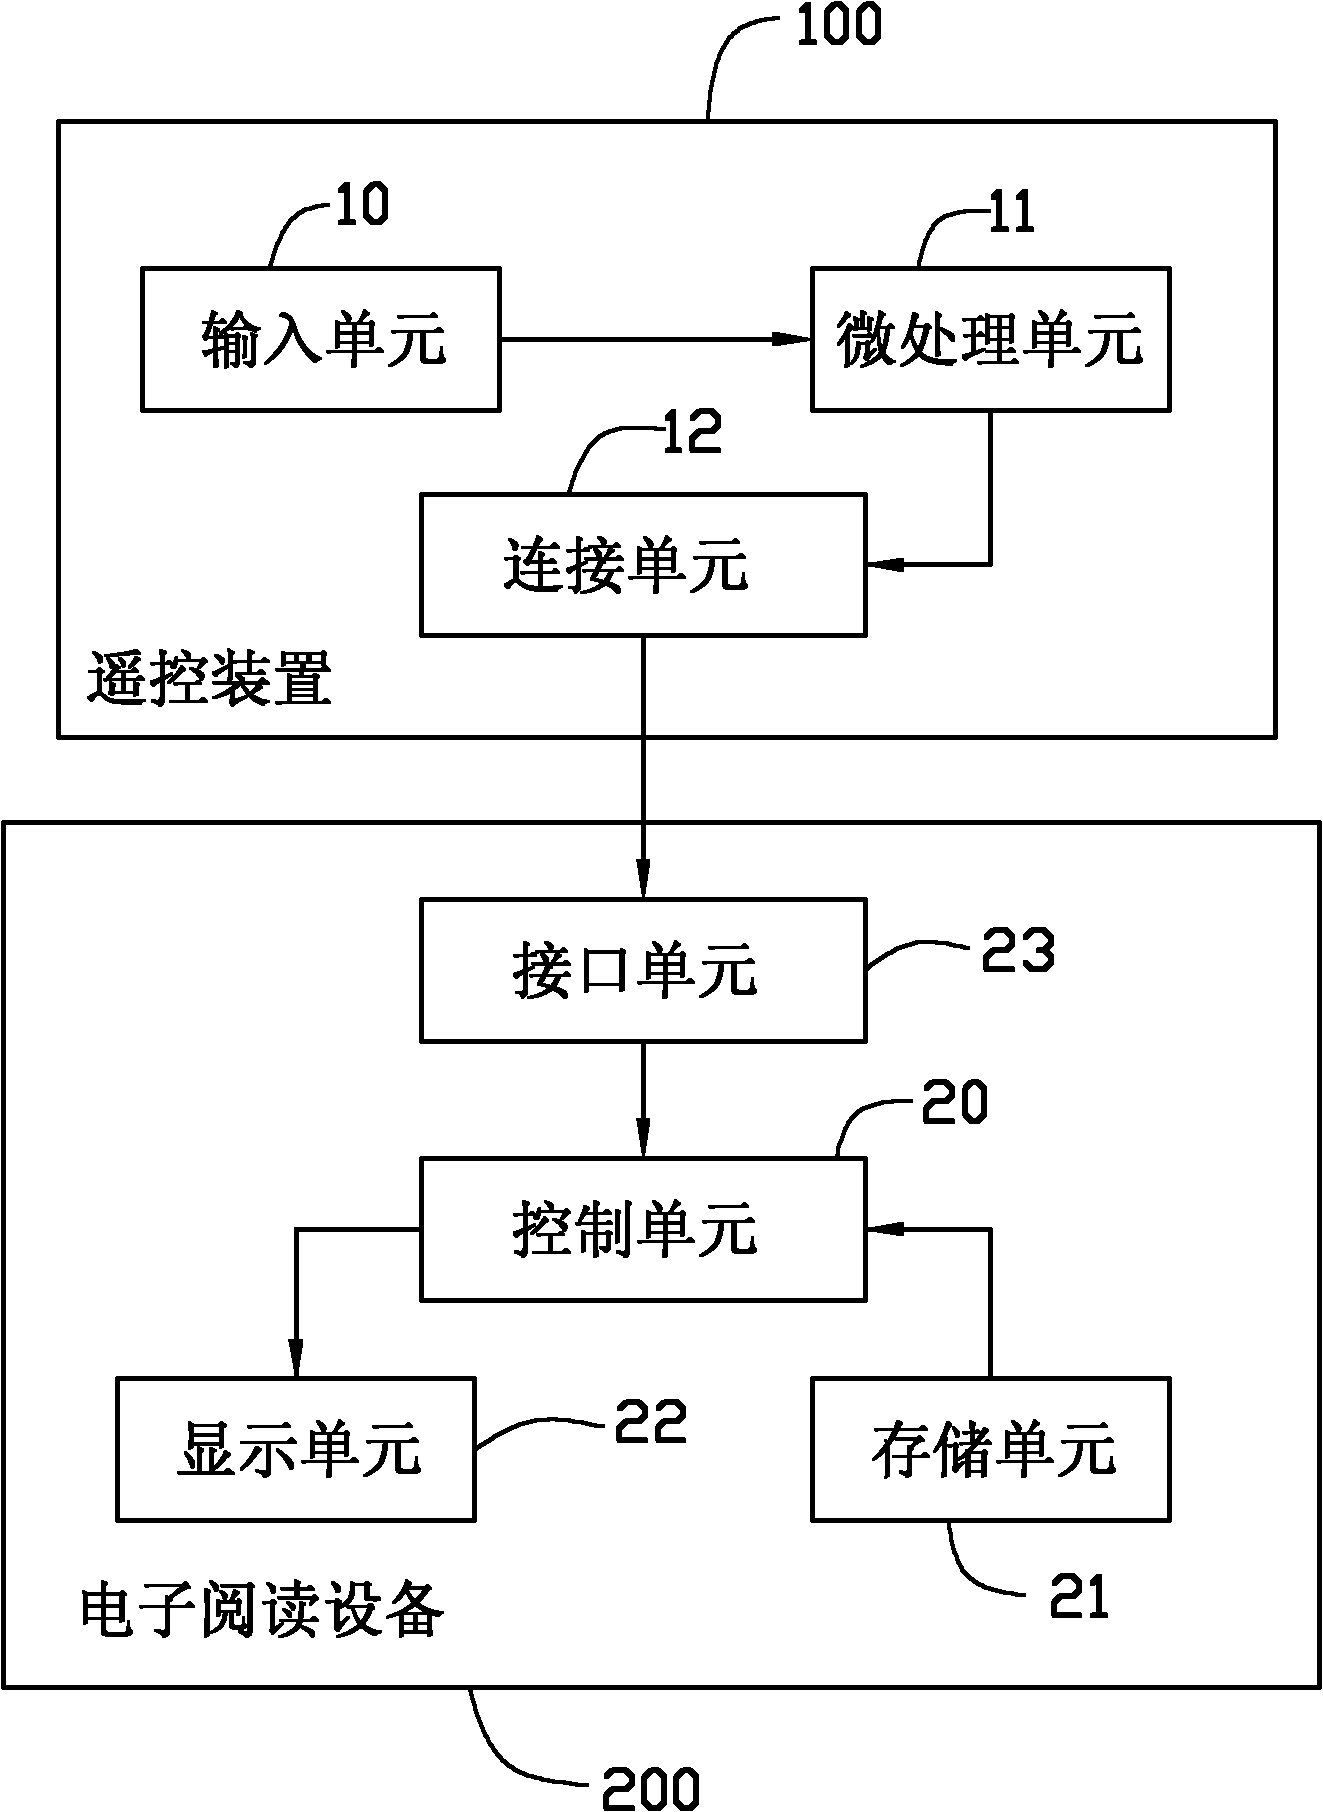 Remote control device and method of electronic reading device